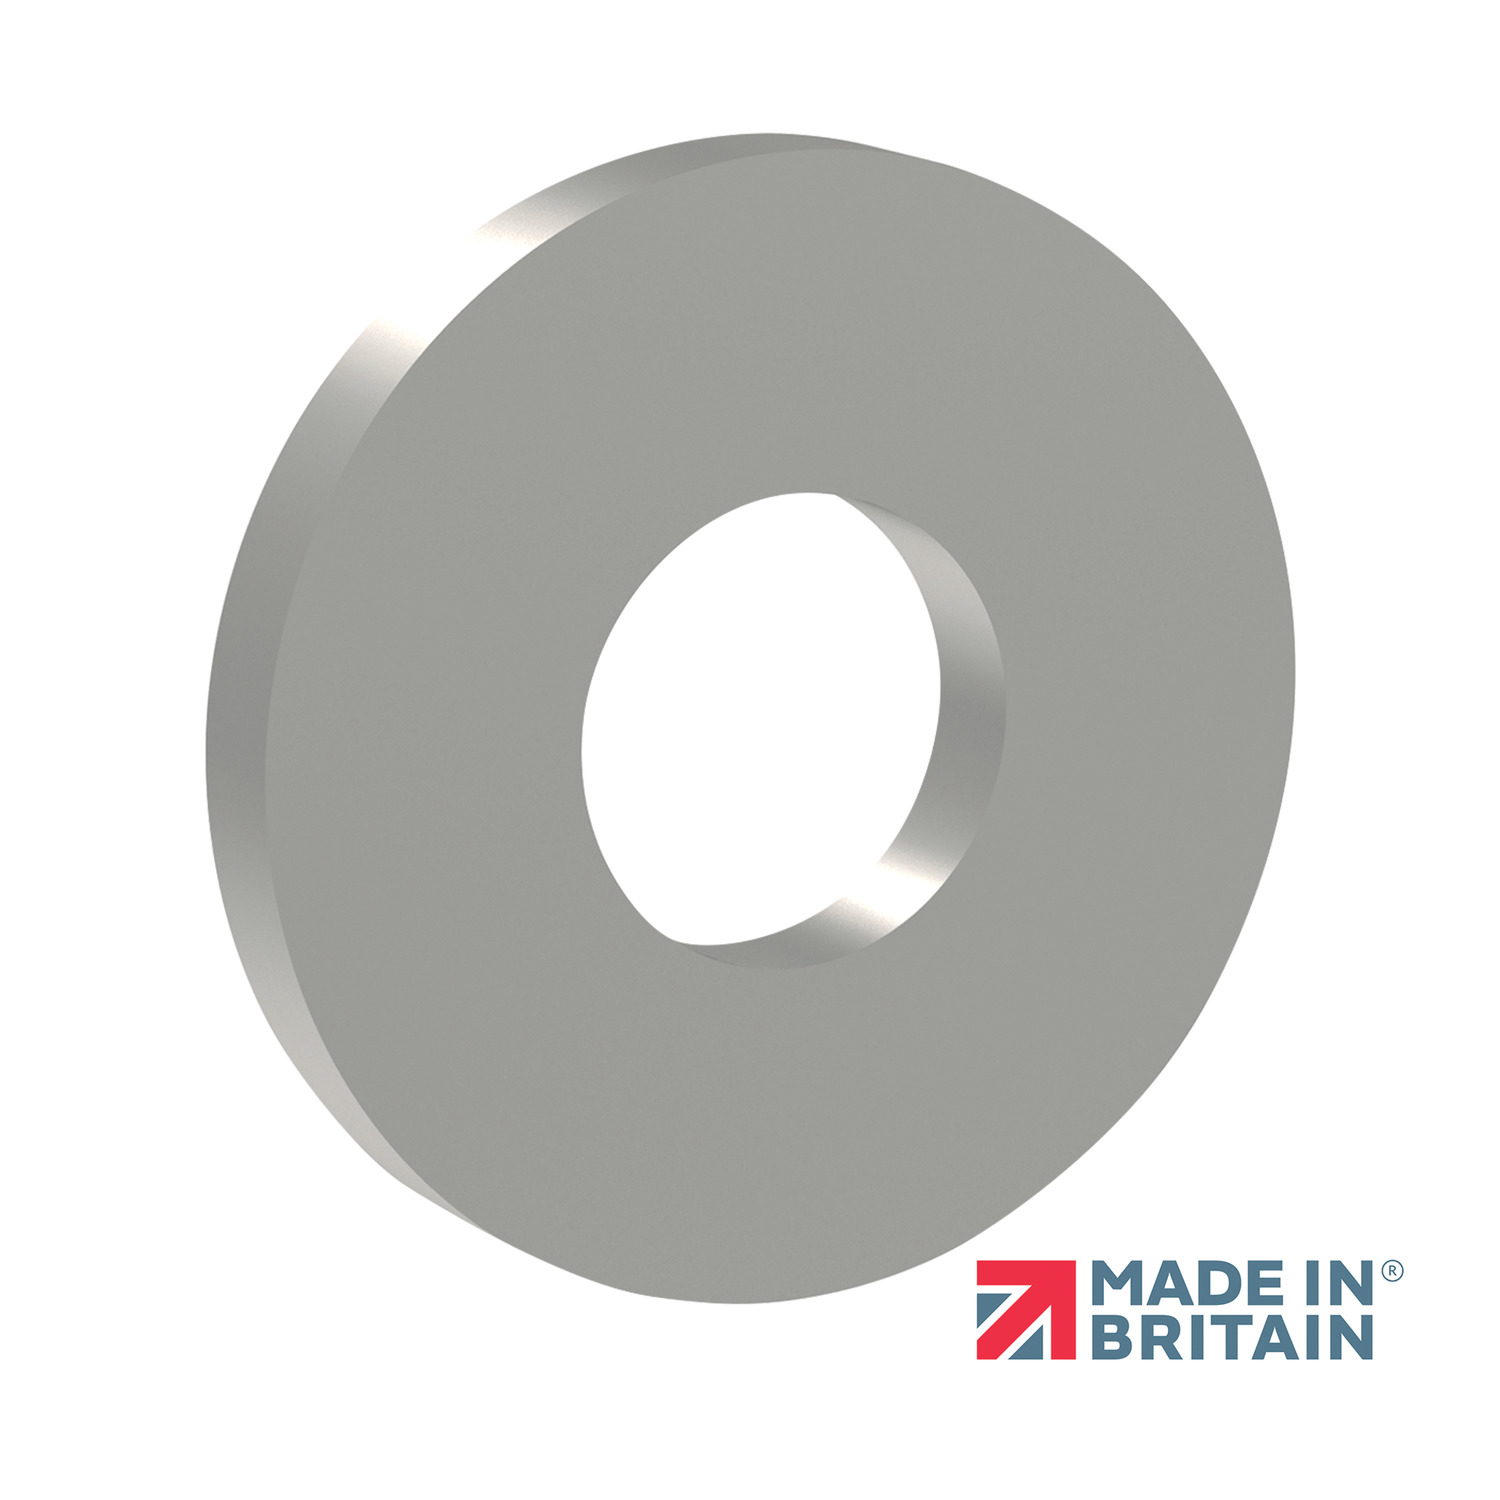 Threaded Captive Washers Threaded captive washers for use with our captive screws, available in stainless steel (A2, AISI 303 and A4, AISI 316) and zinc plated steel.